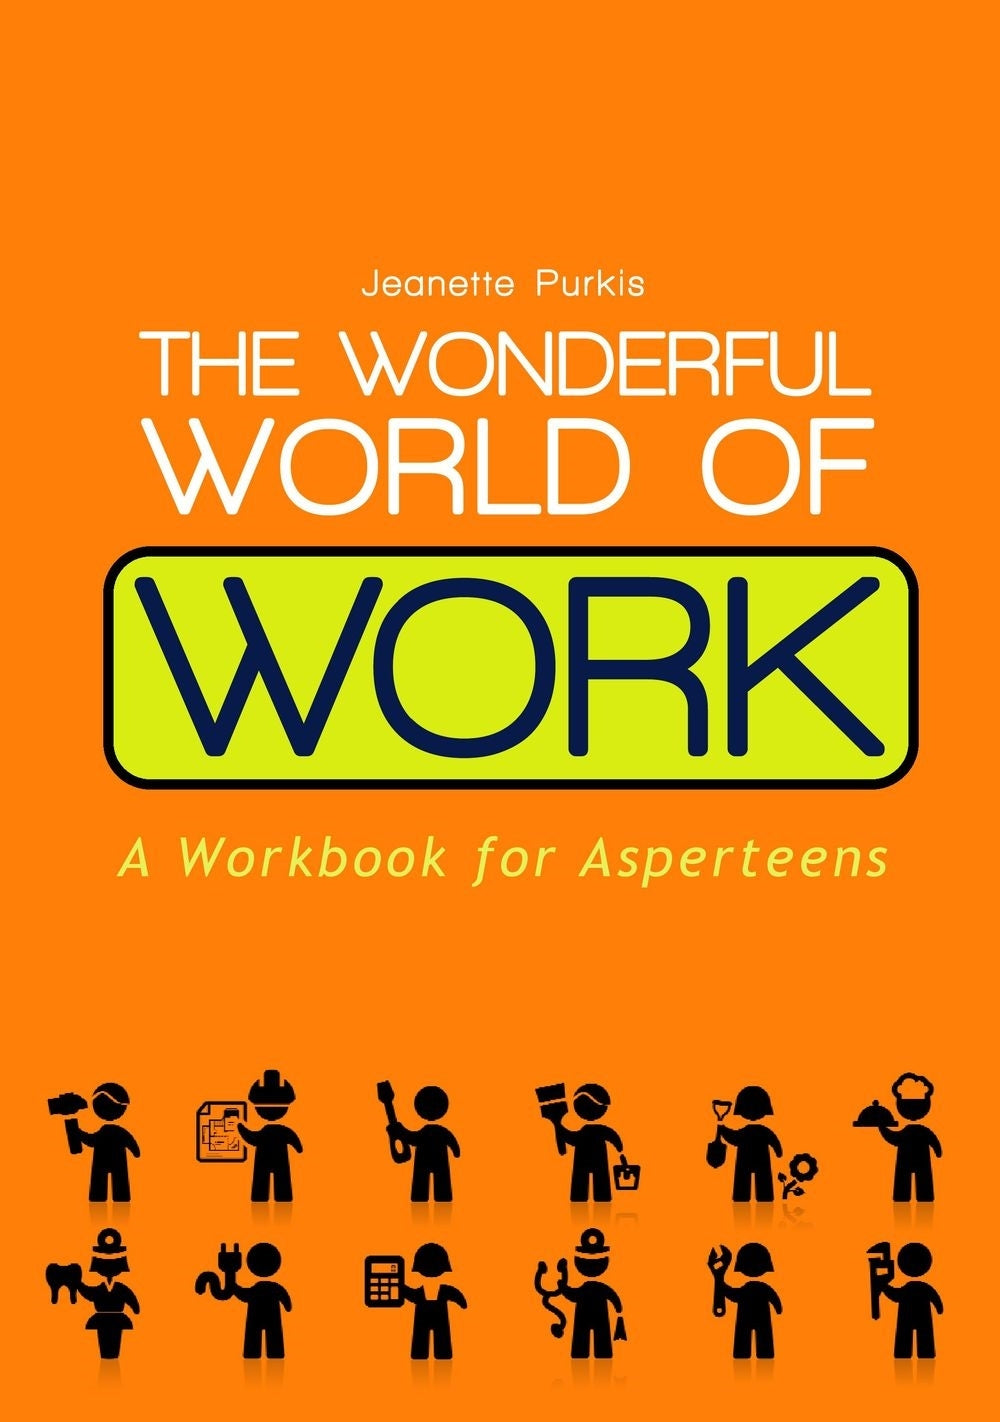 The Wonderful World of Work by Yenn Purkis, Andrew Hore